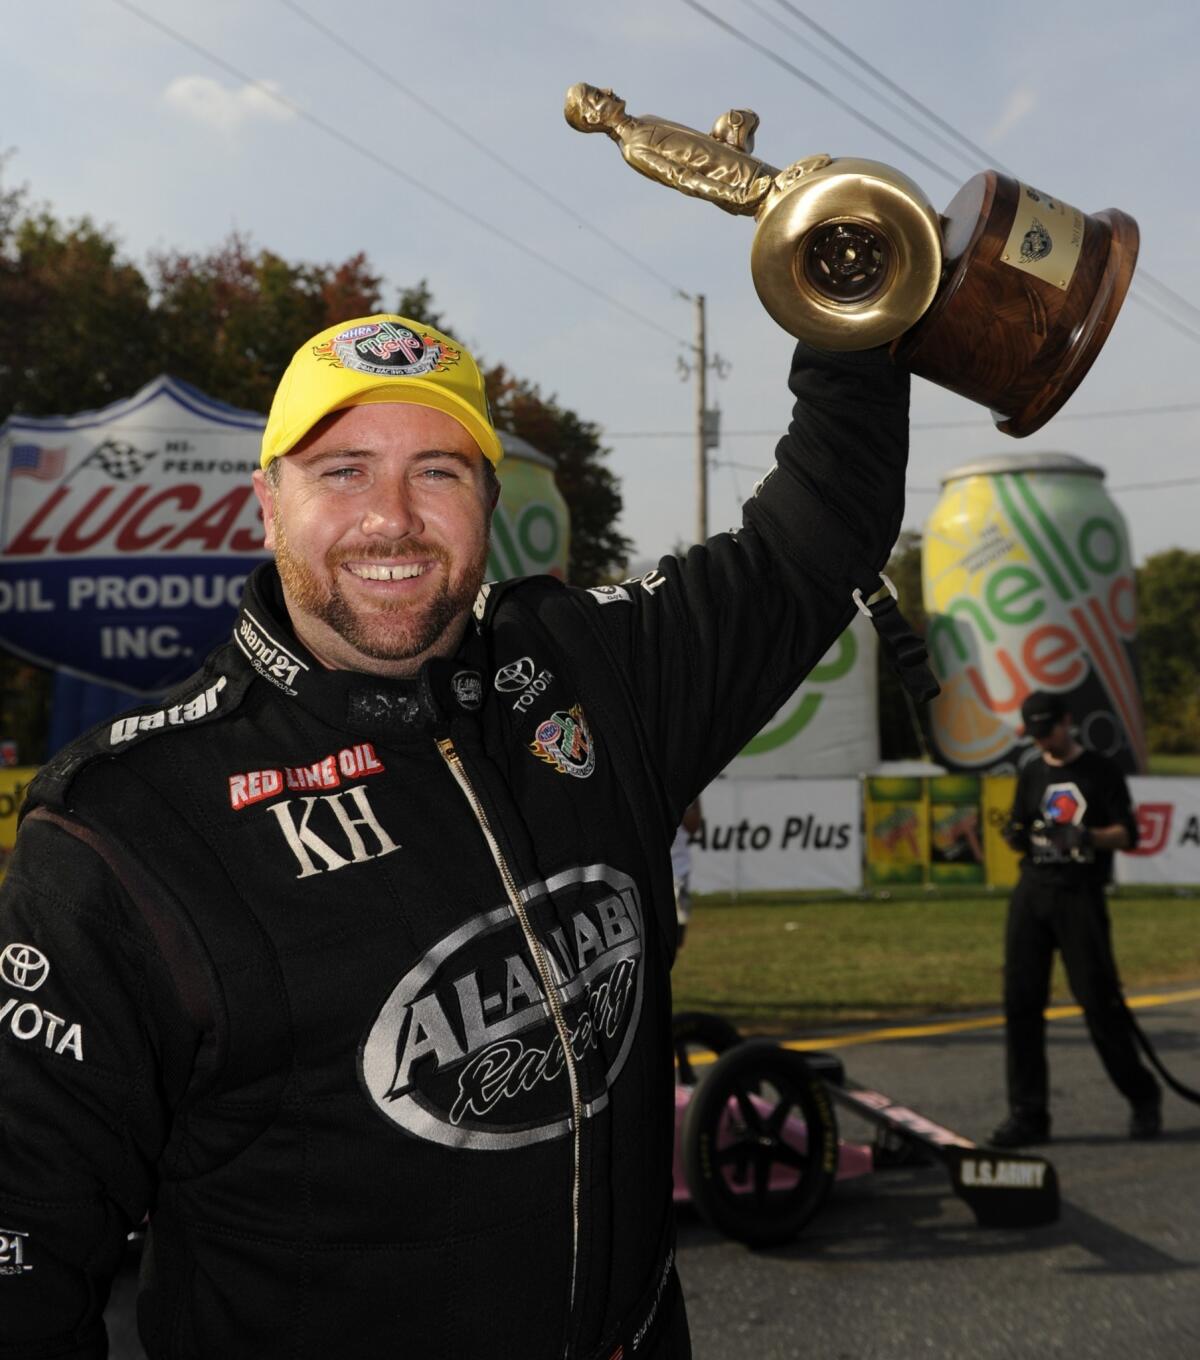 Shawn Langdon, who is closing in on the NHRA top-fuel dragster title, had only one win prior to this season.